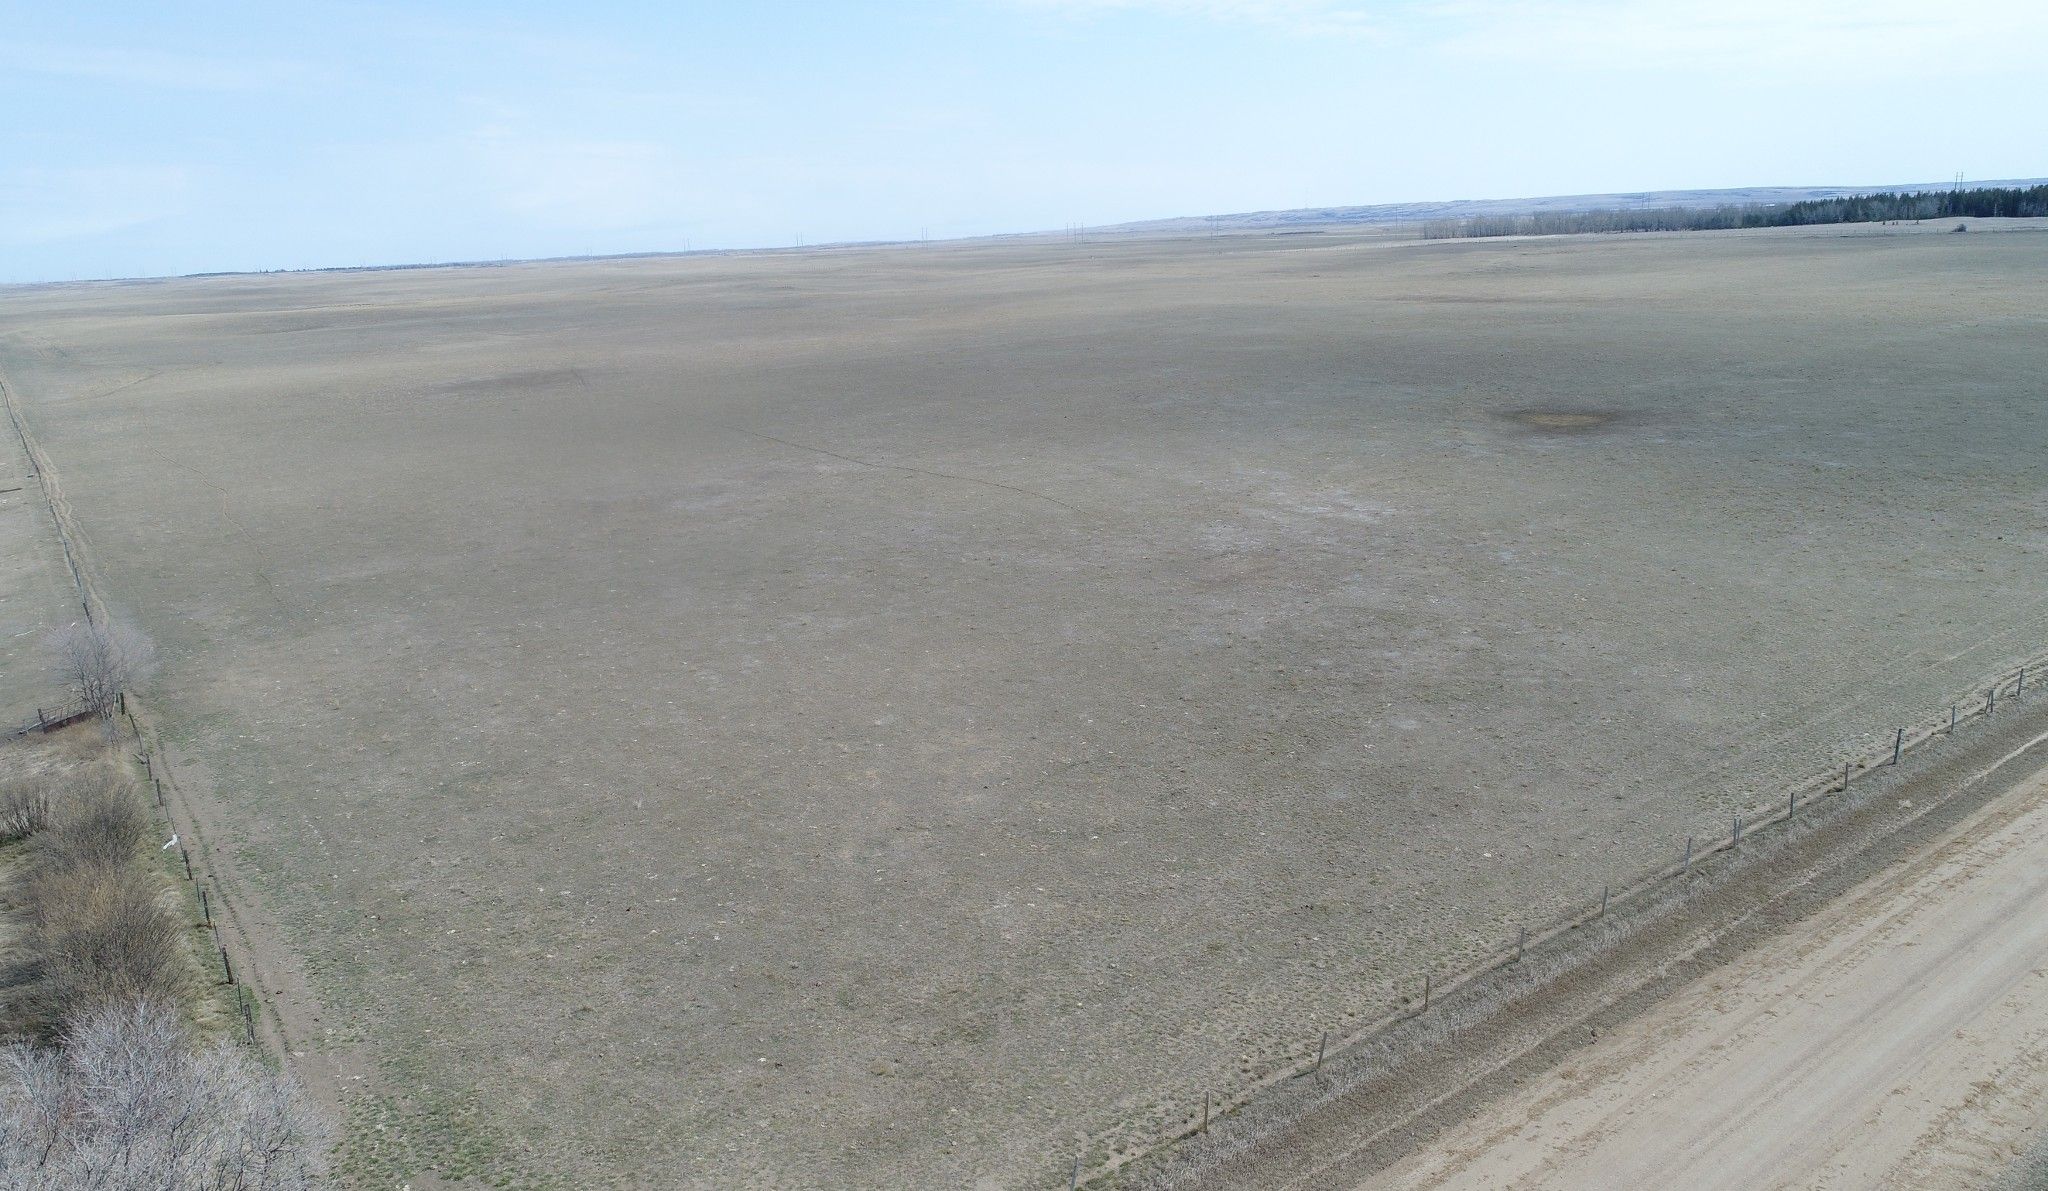 Main Photo: 1,368.23 Acres - Mortlach, SK Area - Trans Canada Hwy #1 Frontage - RM's 162 & 163